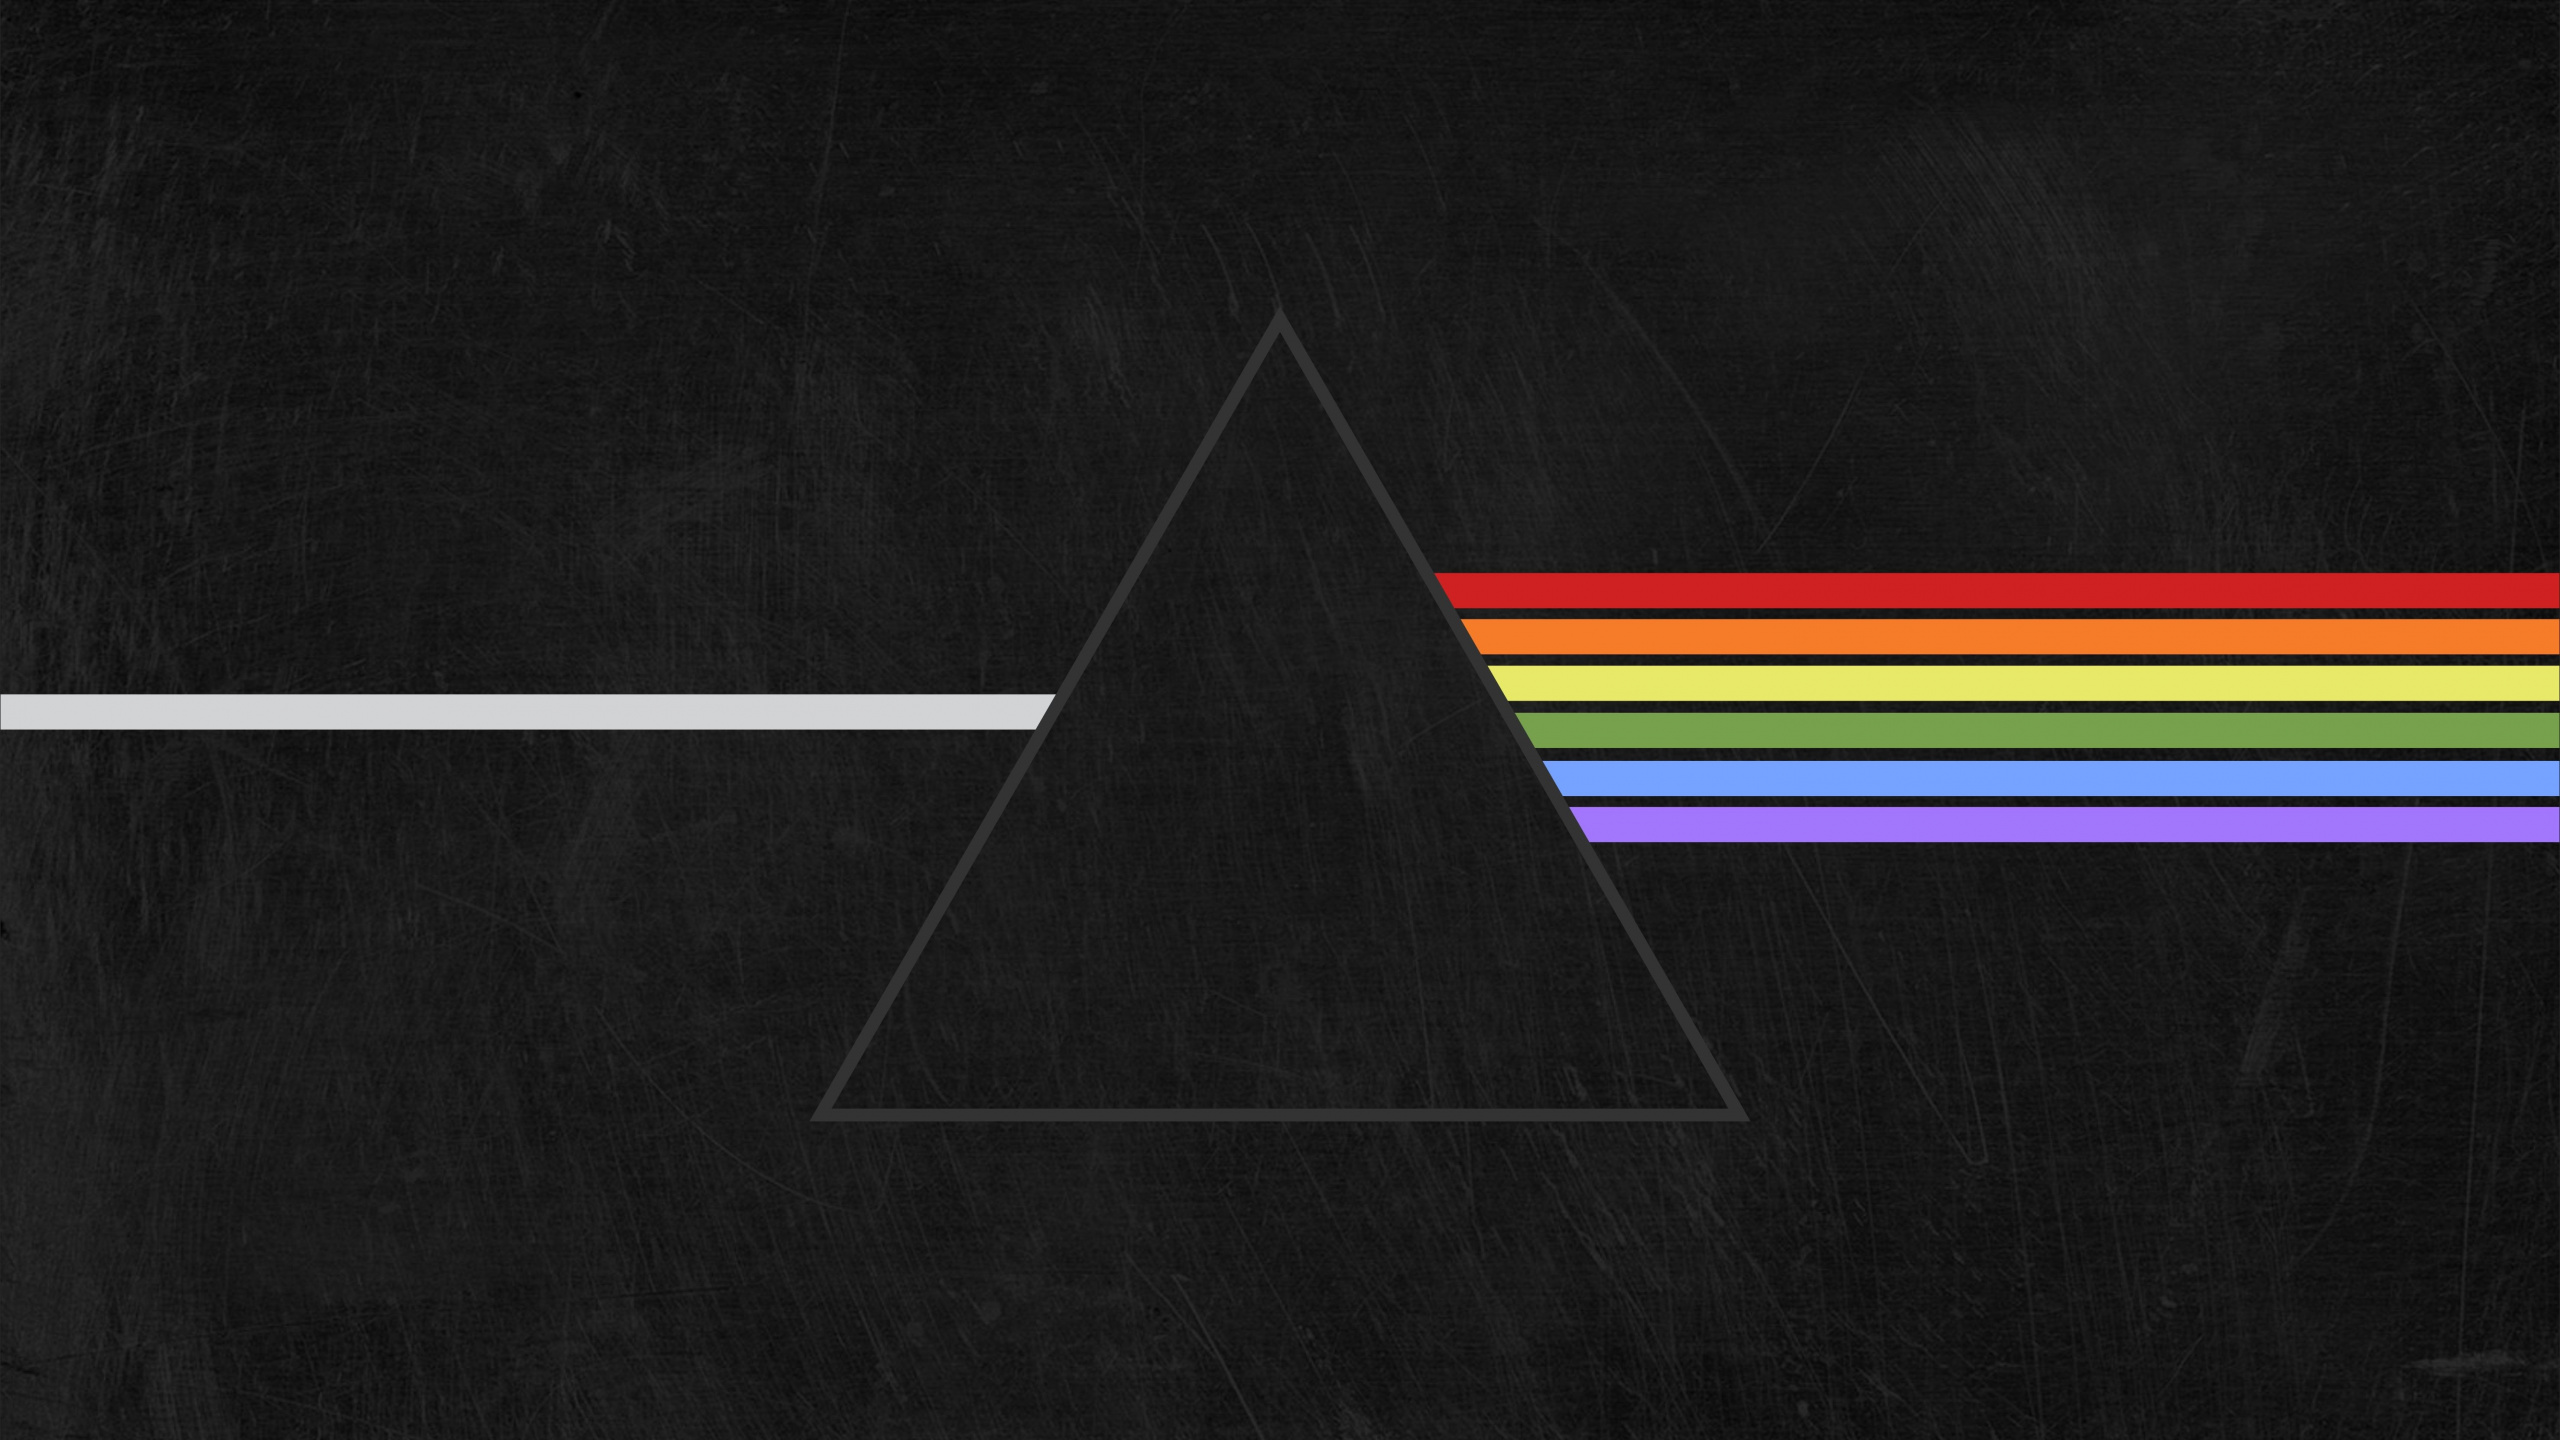 The Dark Side of The Moon, Pink Floyd, Prism, Black, Line. Wallpaper in 2560x1440 Resolution